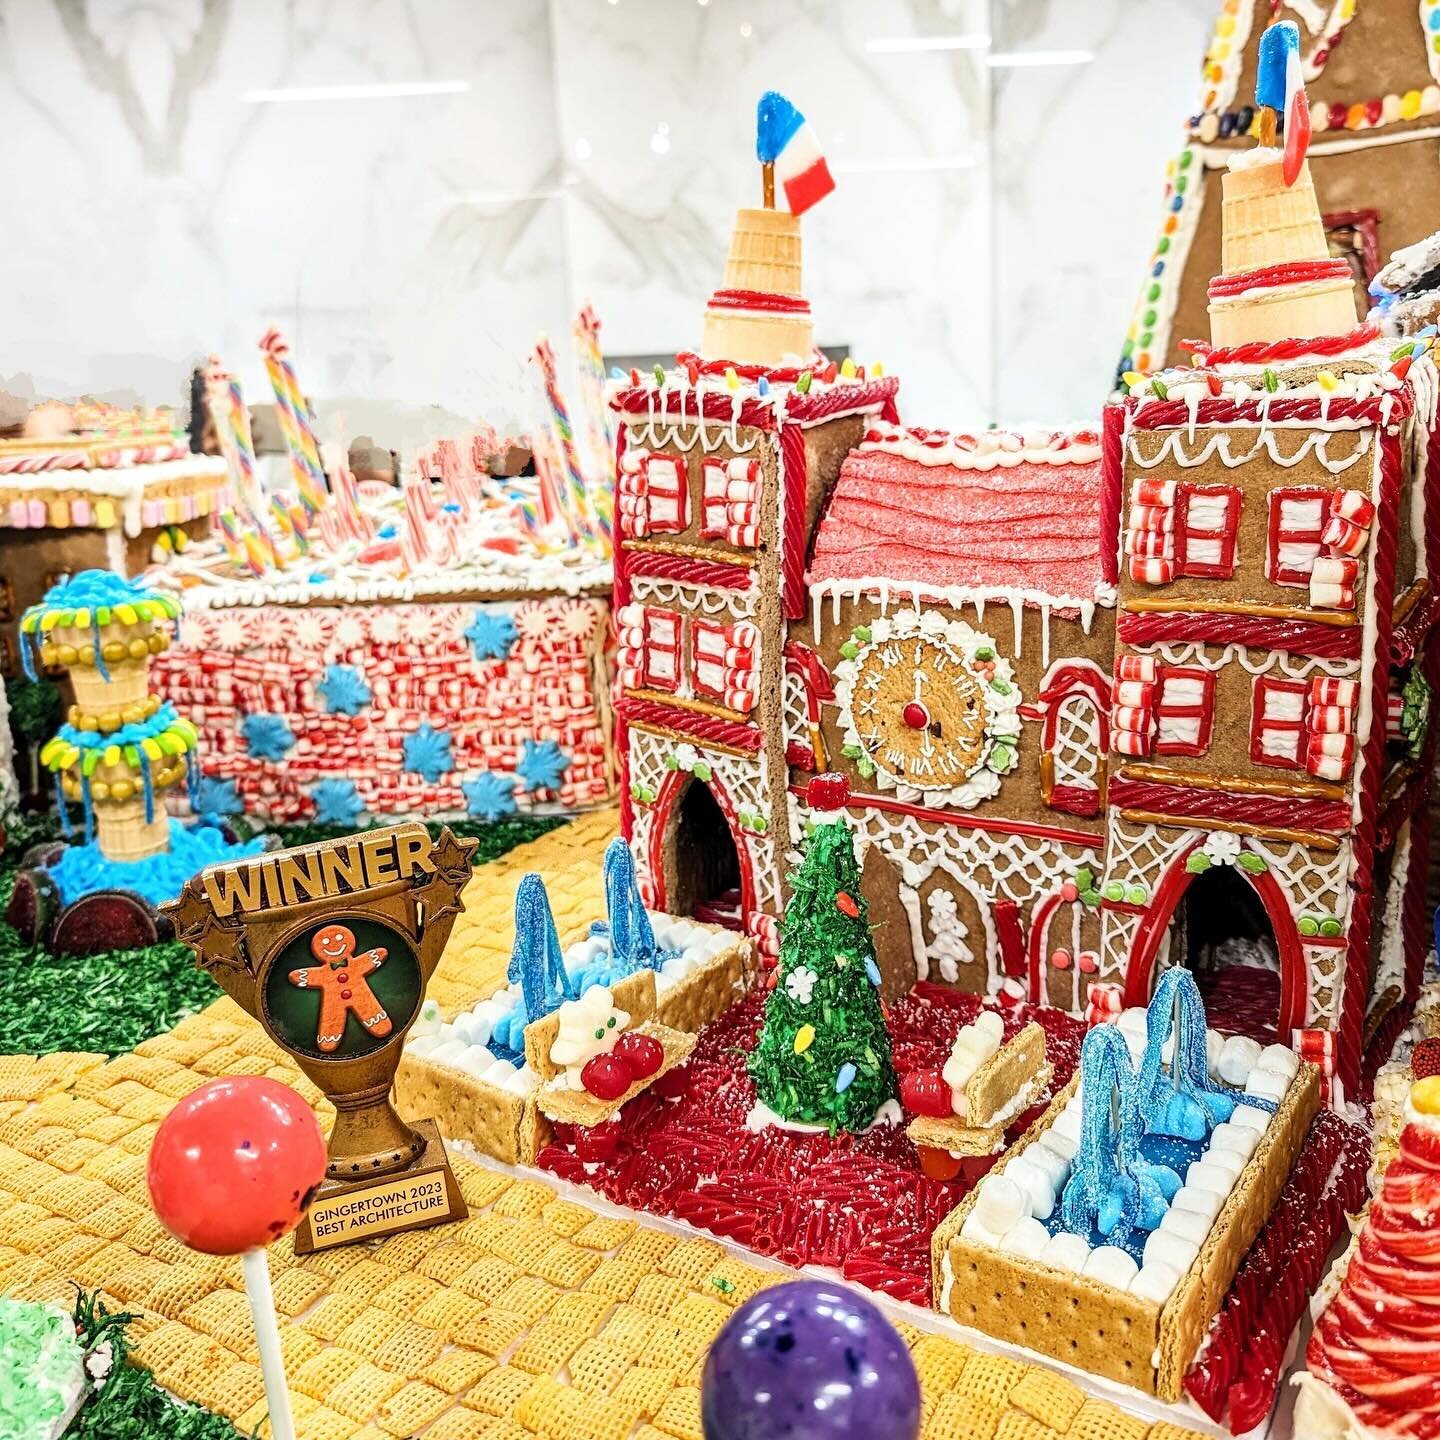 Tis&rsquo; the season for fam, friends, and a lil&rsquo; friendly competition 🥇. 

A beloved tradition, our team looks forward to the challenge and creativity of @specialtytile&rsquo;s hosted Gingertown event every year. 

We&rsquo;ve tried, tested 